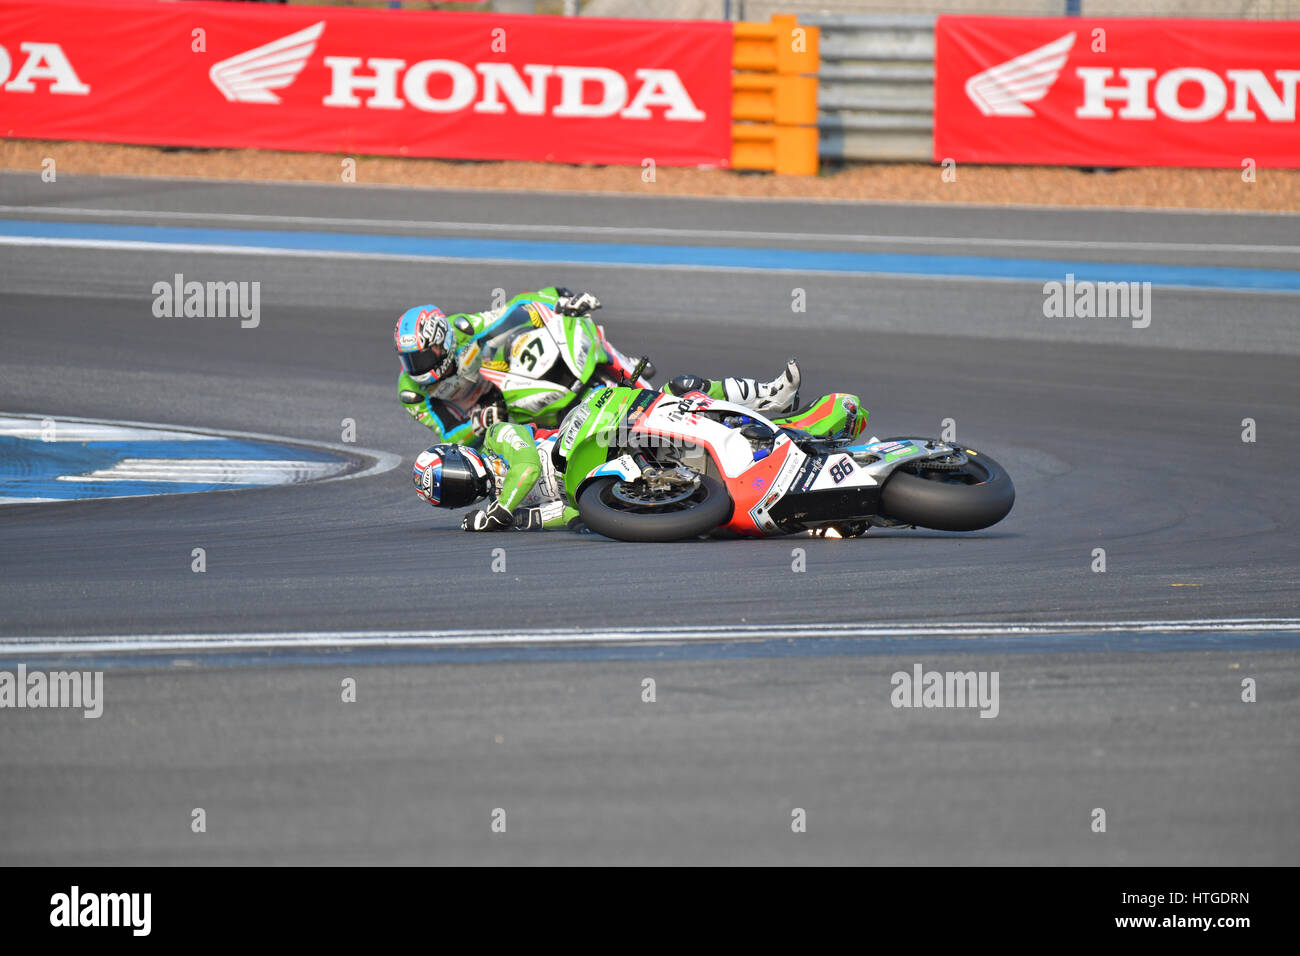 Buriramm, Thailand. 11th March 2017. Ayrton Badovini #86 of Italy with Kawasaki ZX-10R suffered an accident during in FIM Superbike World Championship at Chang International Circuit on March 11, 2017 in Buriram Thailand. Credit: Chatchai Somwat/Alamy Live News Stock Photo